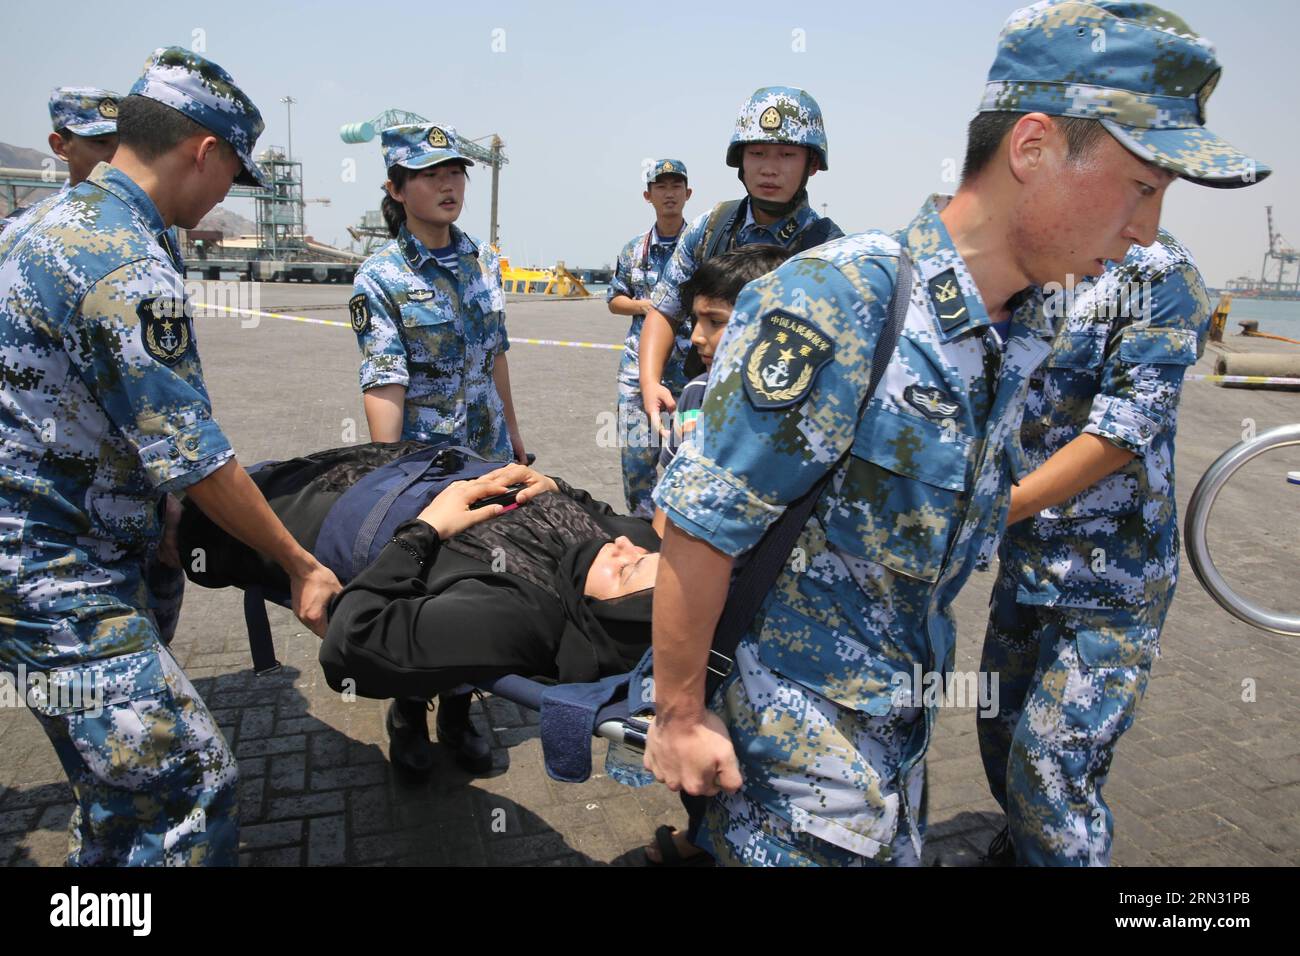 Crew members help a woman board the Chinese Linyi missile frigate in Aden Harbor, Yemen, April 2, 2015. A total of 225 nationals from 10 countries who were evacuated from conflict-ridden Yemen arrived in Djibouti onboard a Chinese frigate on Thursday. ) (zcc) YEMEN-ADEN HARBOR-FOREIGNERS-WITHDRAW PanxSiwei PUBLICATIONxNOTxINxCHN   Crew Members Help a Woman Board The Chinese Linyi Missile Frigate in Aden Harbor Yemen April 2 2015 a total of 225 Nationals from 10 Countries Who Were evacuated from CONFLICT  Yemen arrived in Djibouti Onboard a Chinese Frigate ON Thursday ZCC Yemen Aden Harbor fore Stock Photo